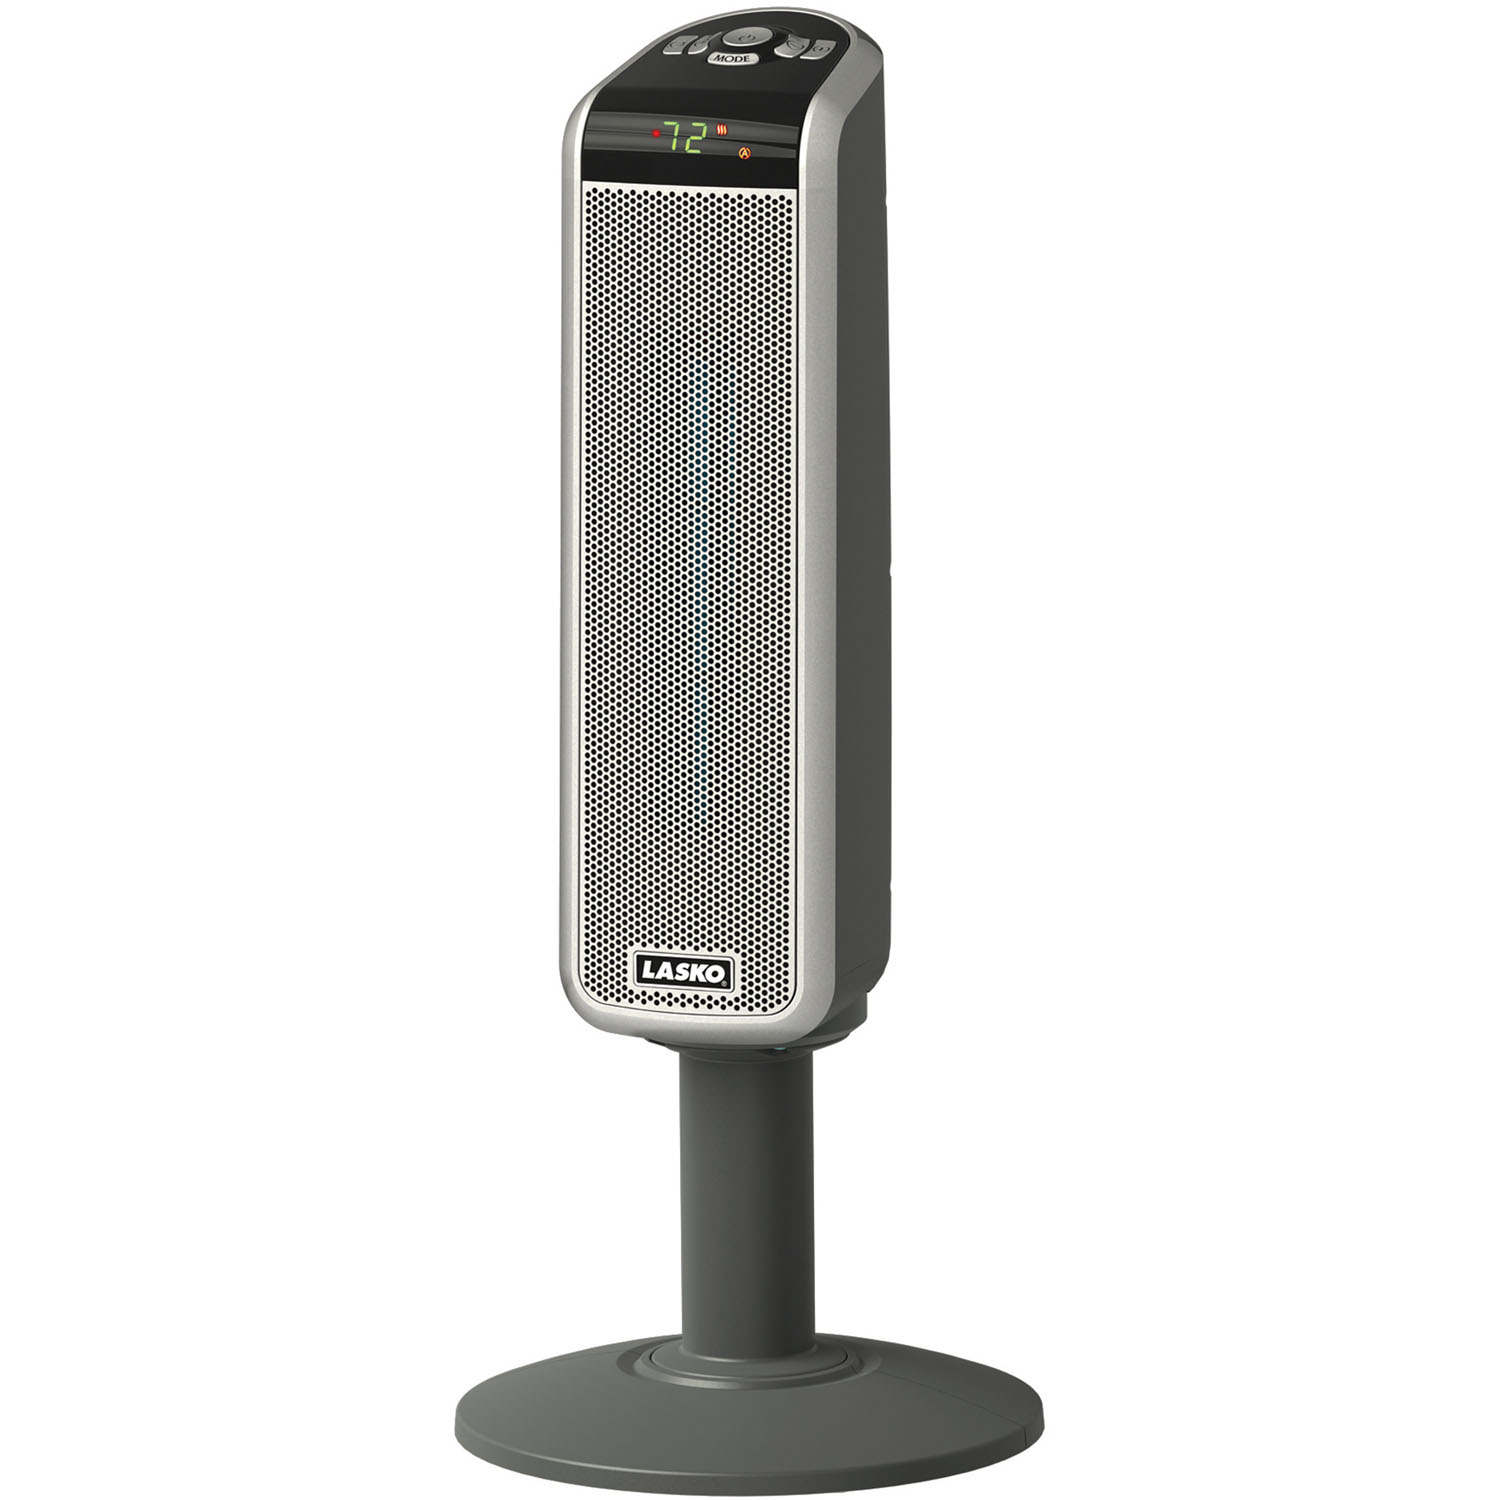 Lasko Products 5397 Space-Saving Ceramic Pedestal Heater with Front-Facing Display and Digital Remote Control